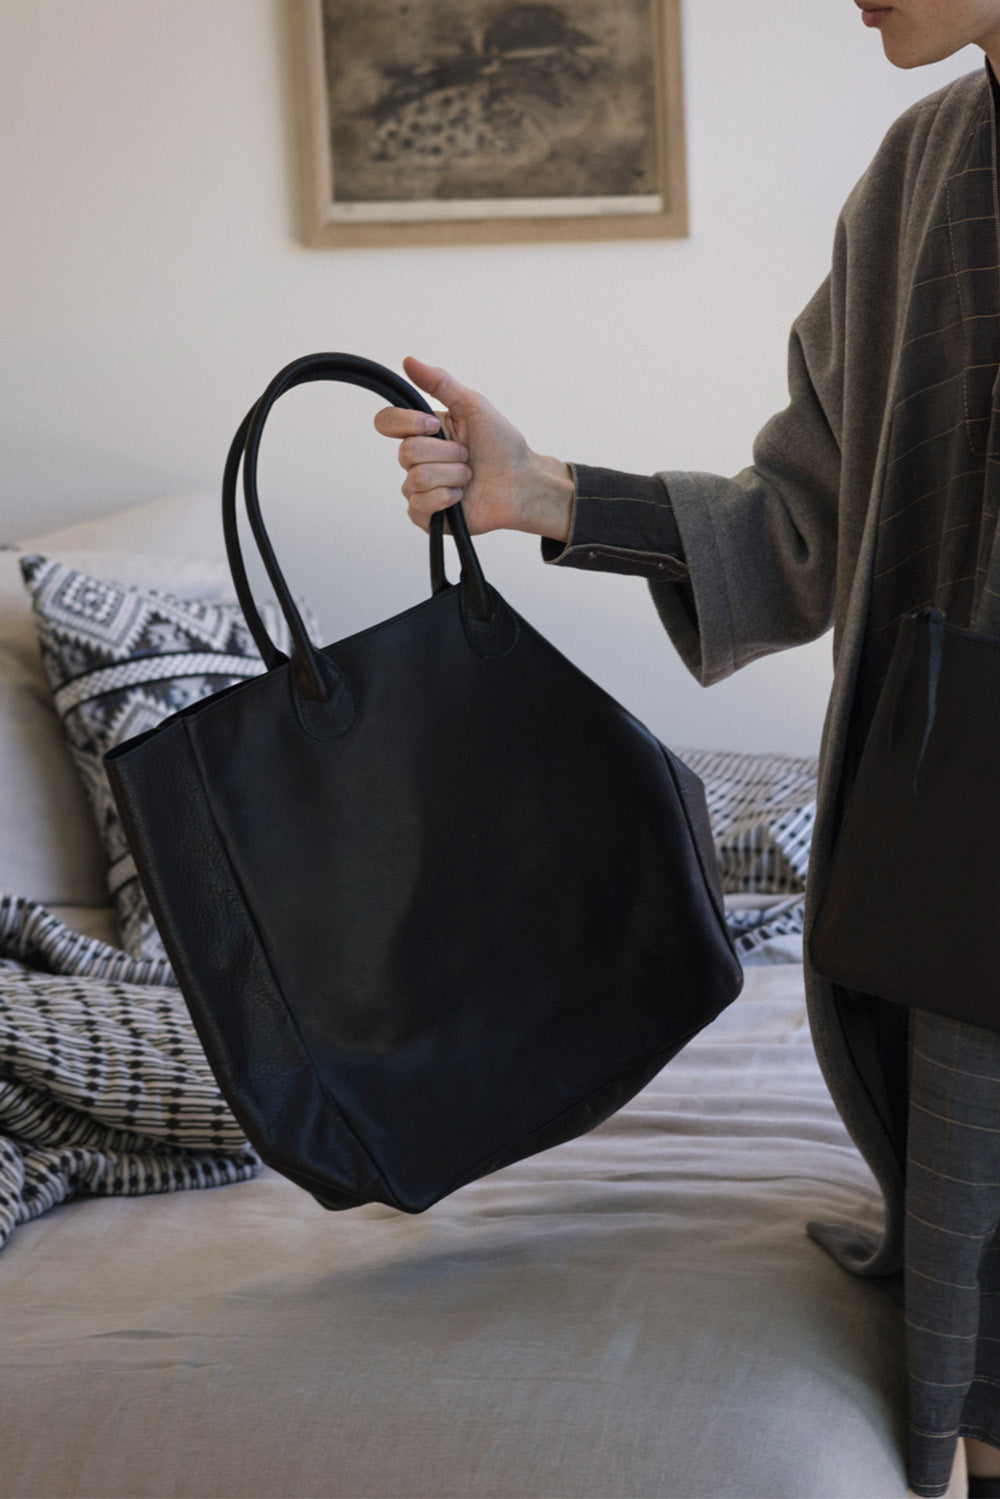 Eve Leather Tote in Black